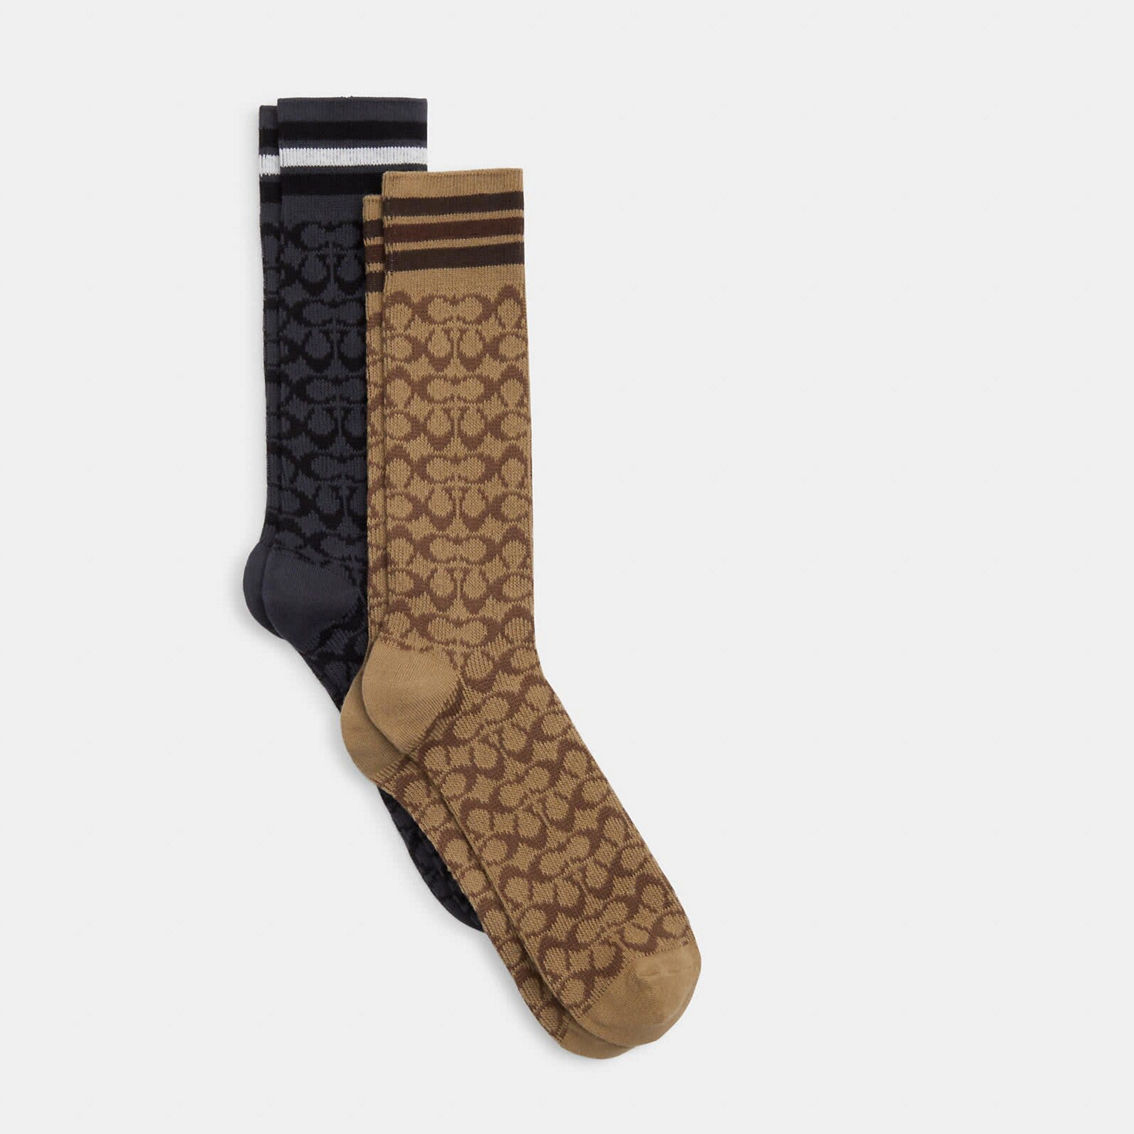 Coach Outlet Signature Calf Socks - Image 2 of 2